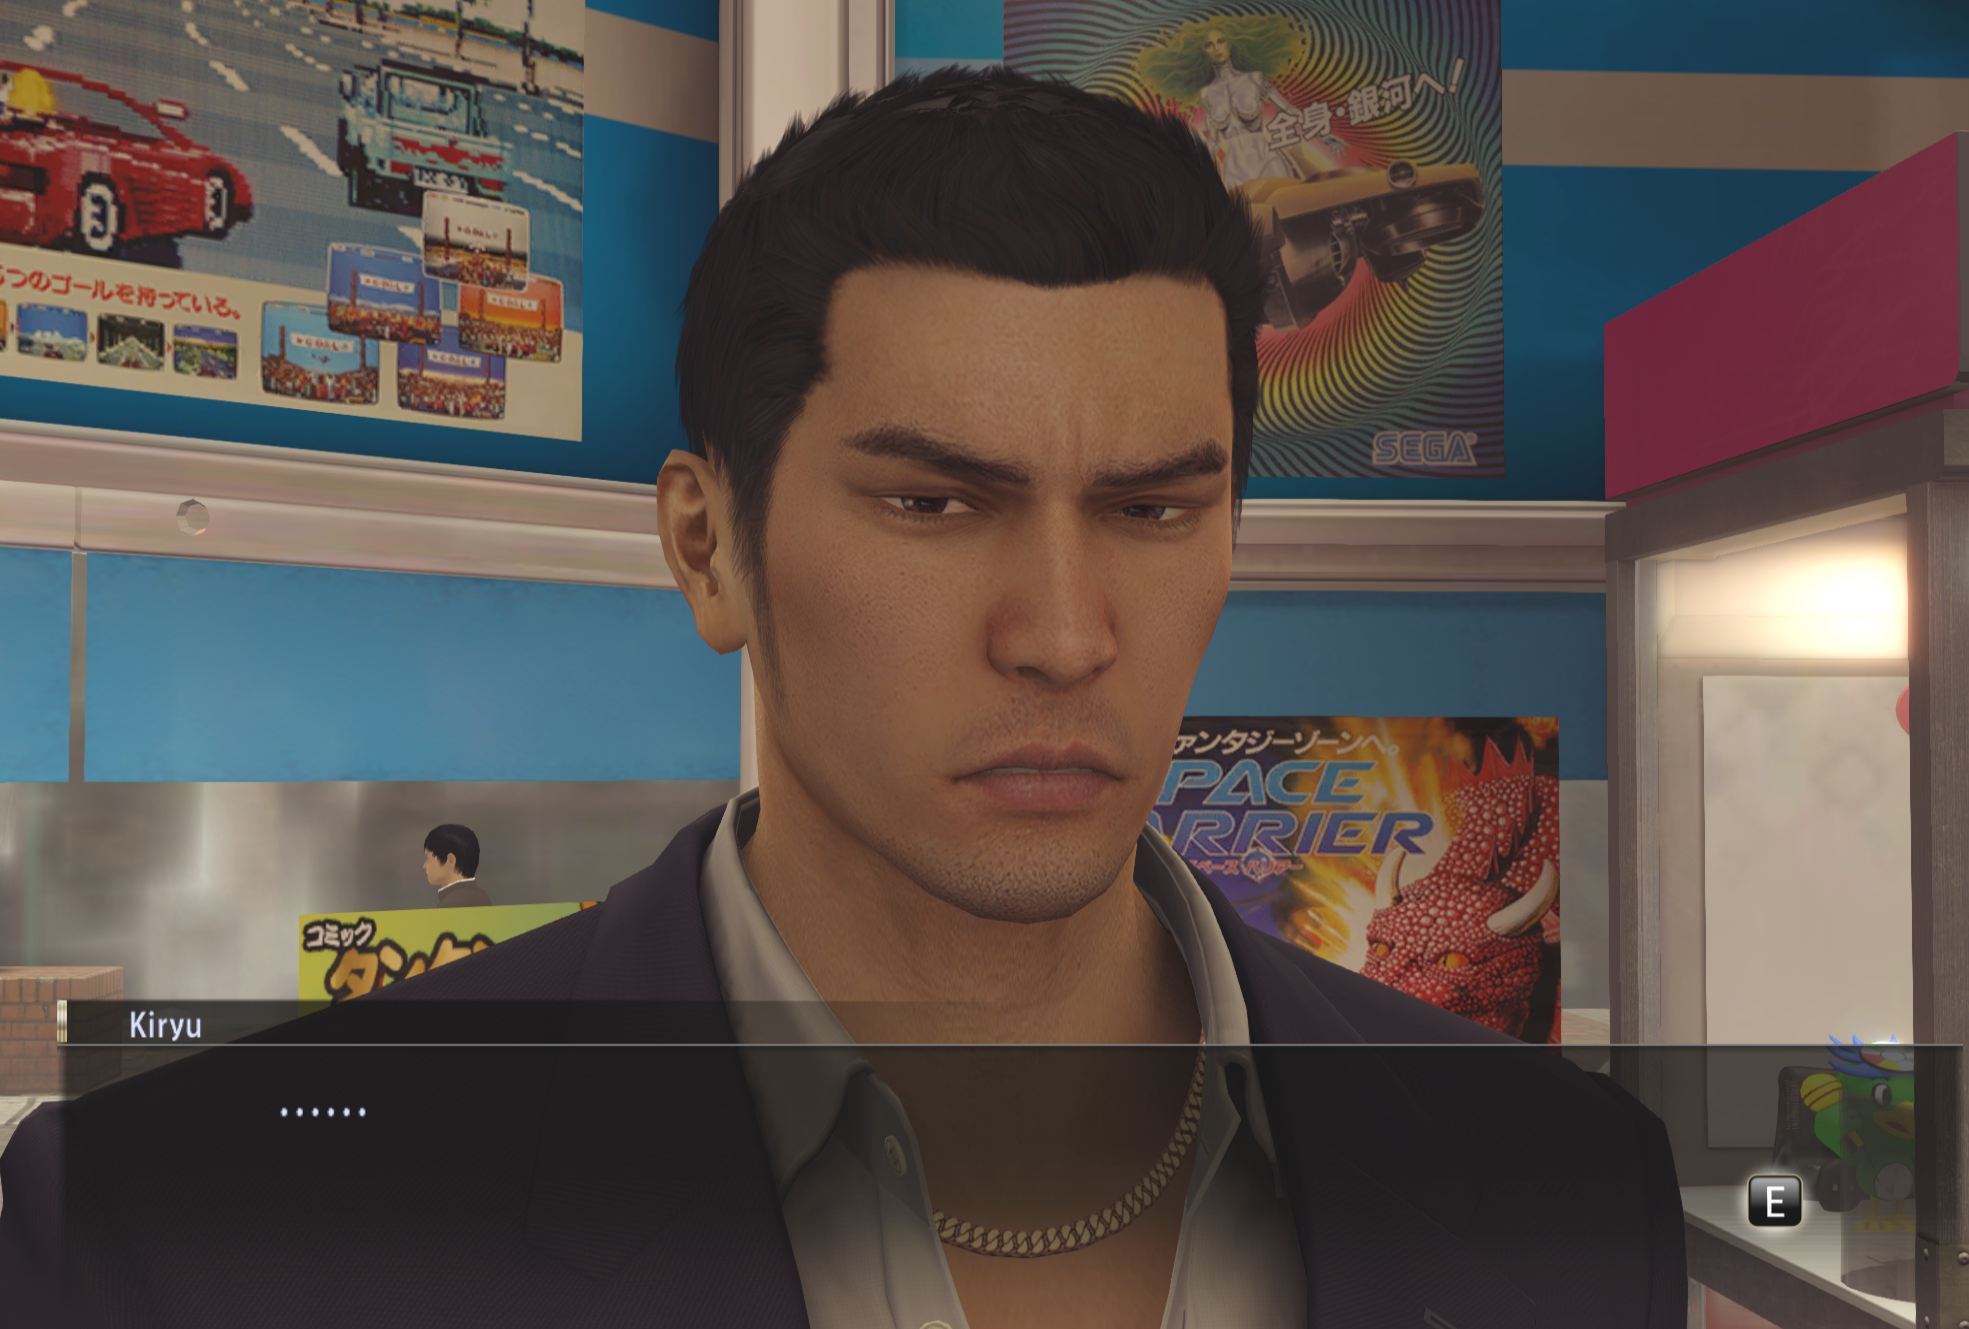 speech-KIRYU-in-Sega-Game-Center-about-Luka-said-about-give-hime-a-RIDE.png